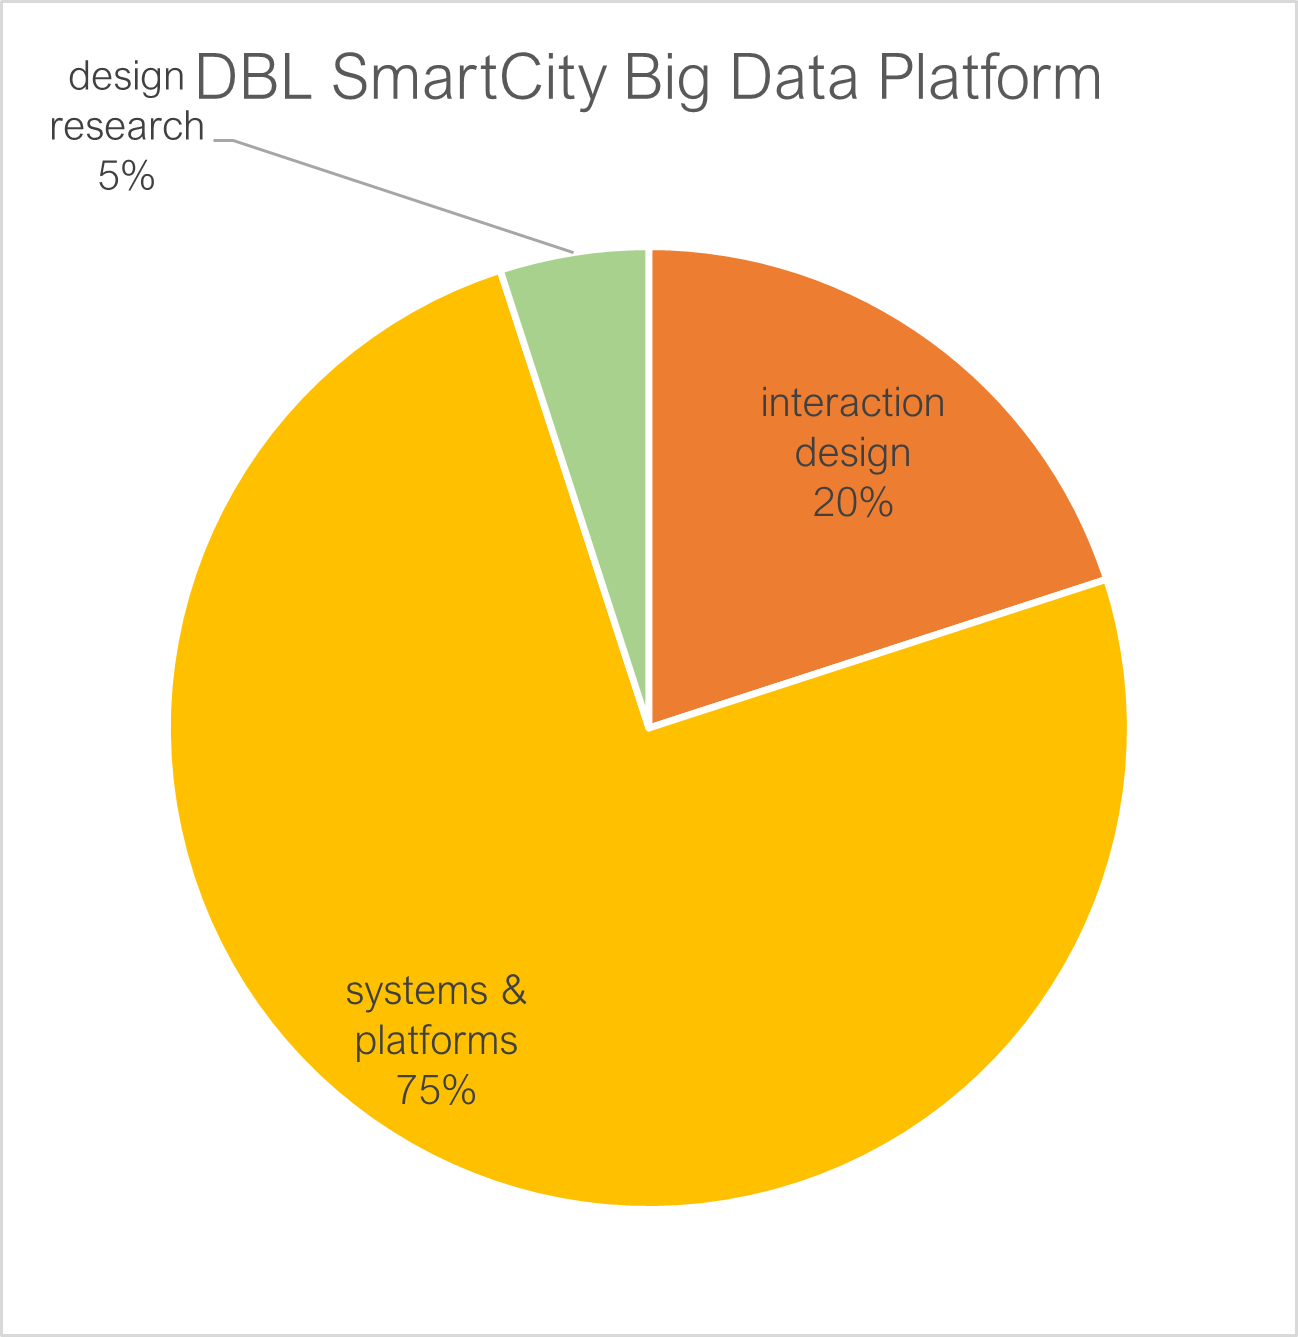 dbl-smartcity: activity proportions